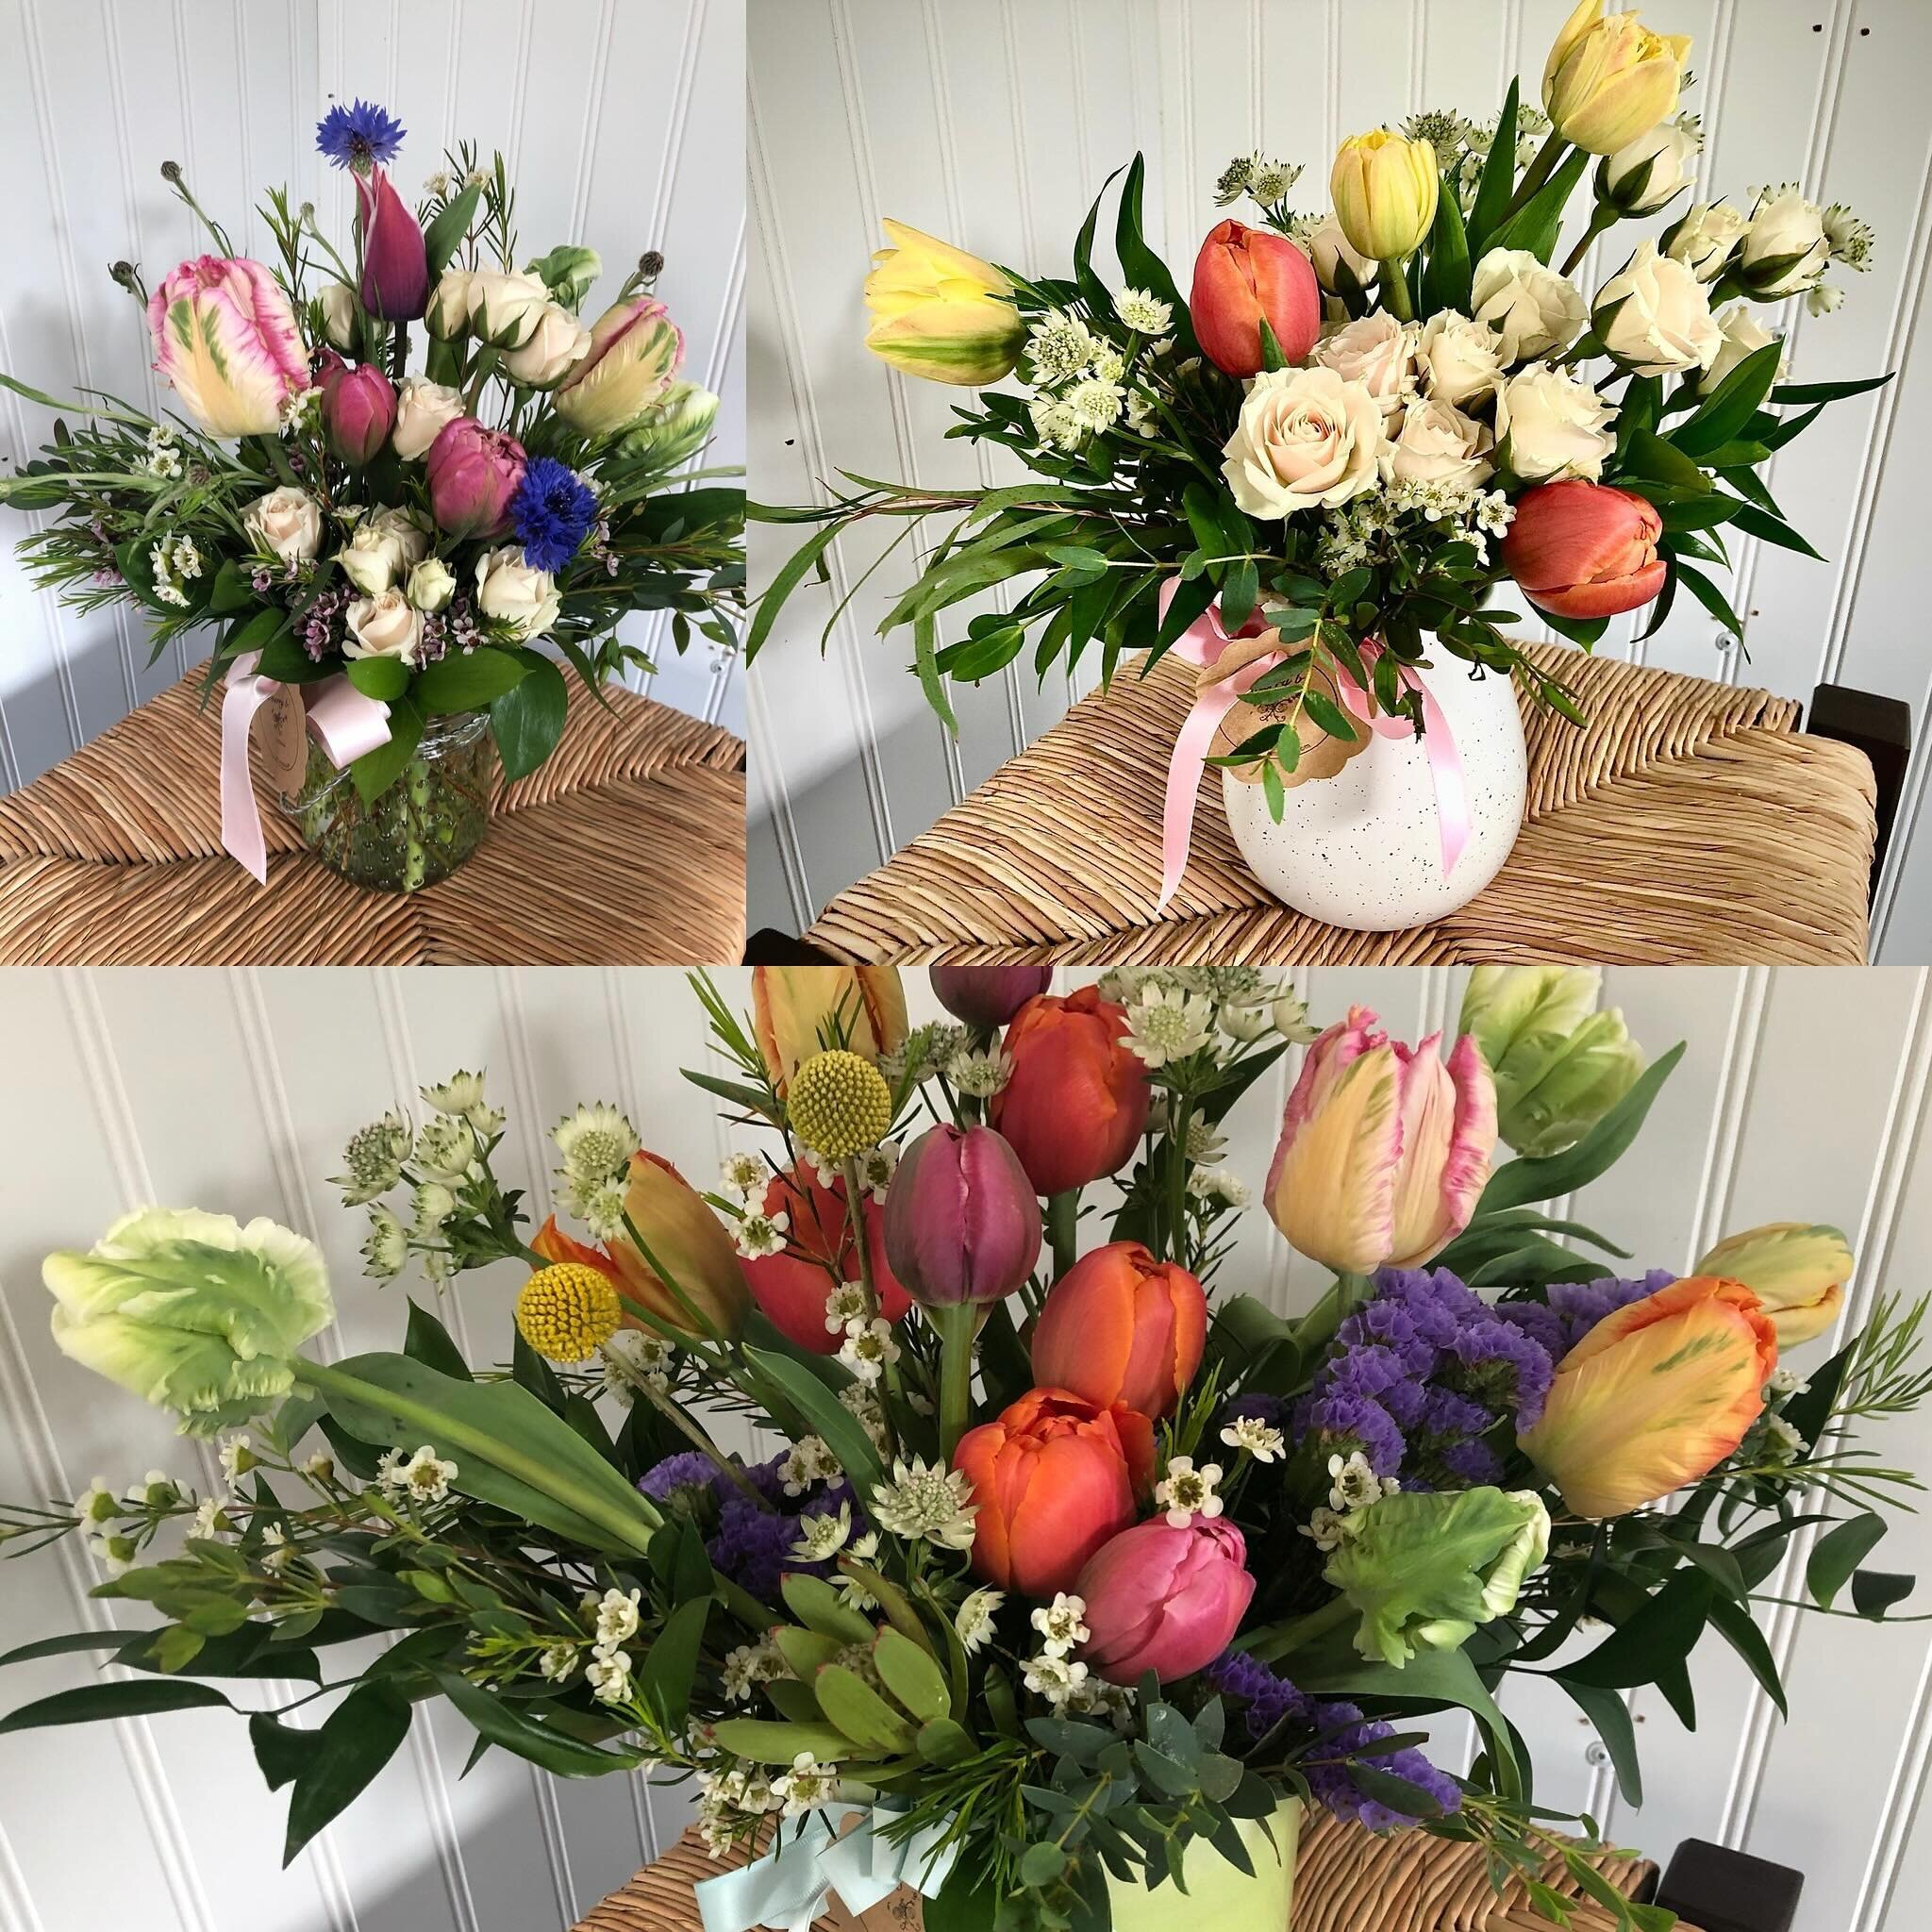 Choose the size and palette that will sweeten your Easter table! Ordering open until Tuesday 3/26! 
Link in bio to learn more and place your order today!
#customflorals
#springcolors🌸 
#ranunculus 
#tulips🌷 
#daffodils🌼 
#amerrybflorals 
#easterfl